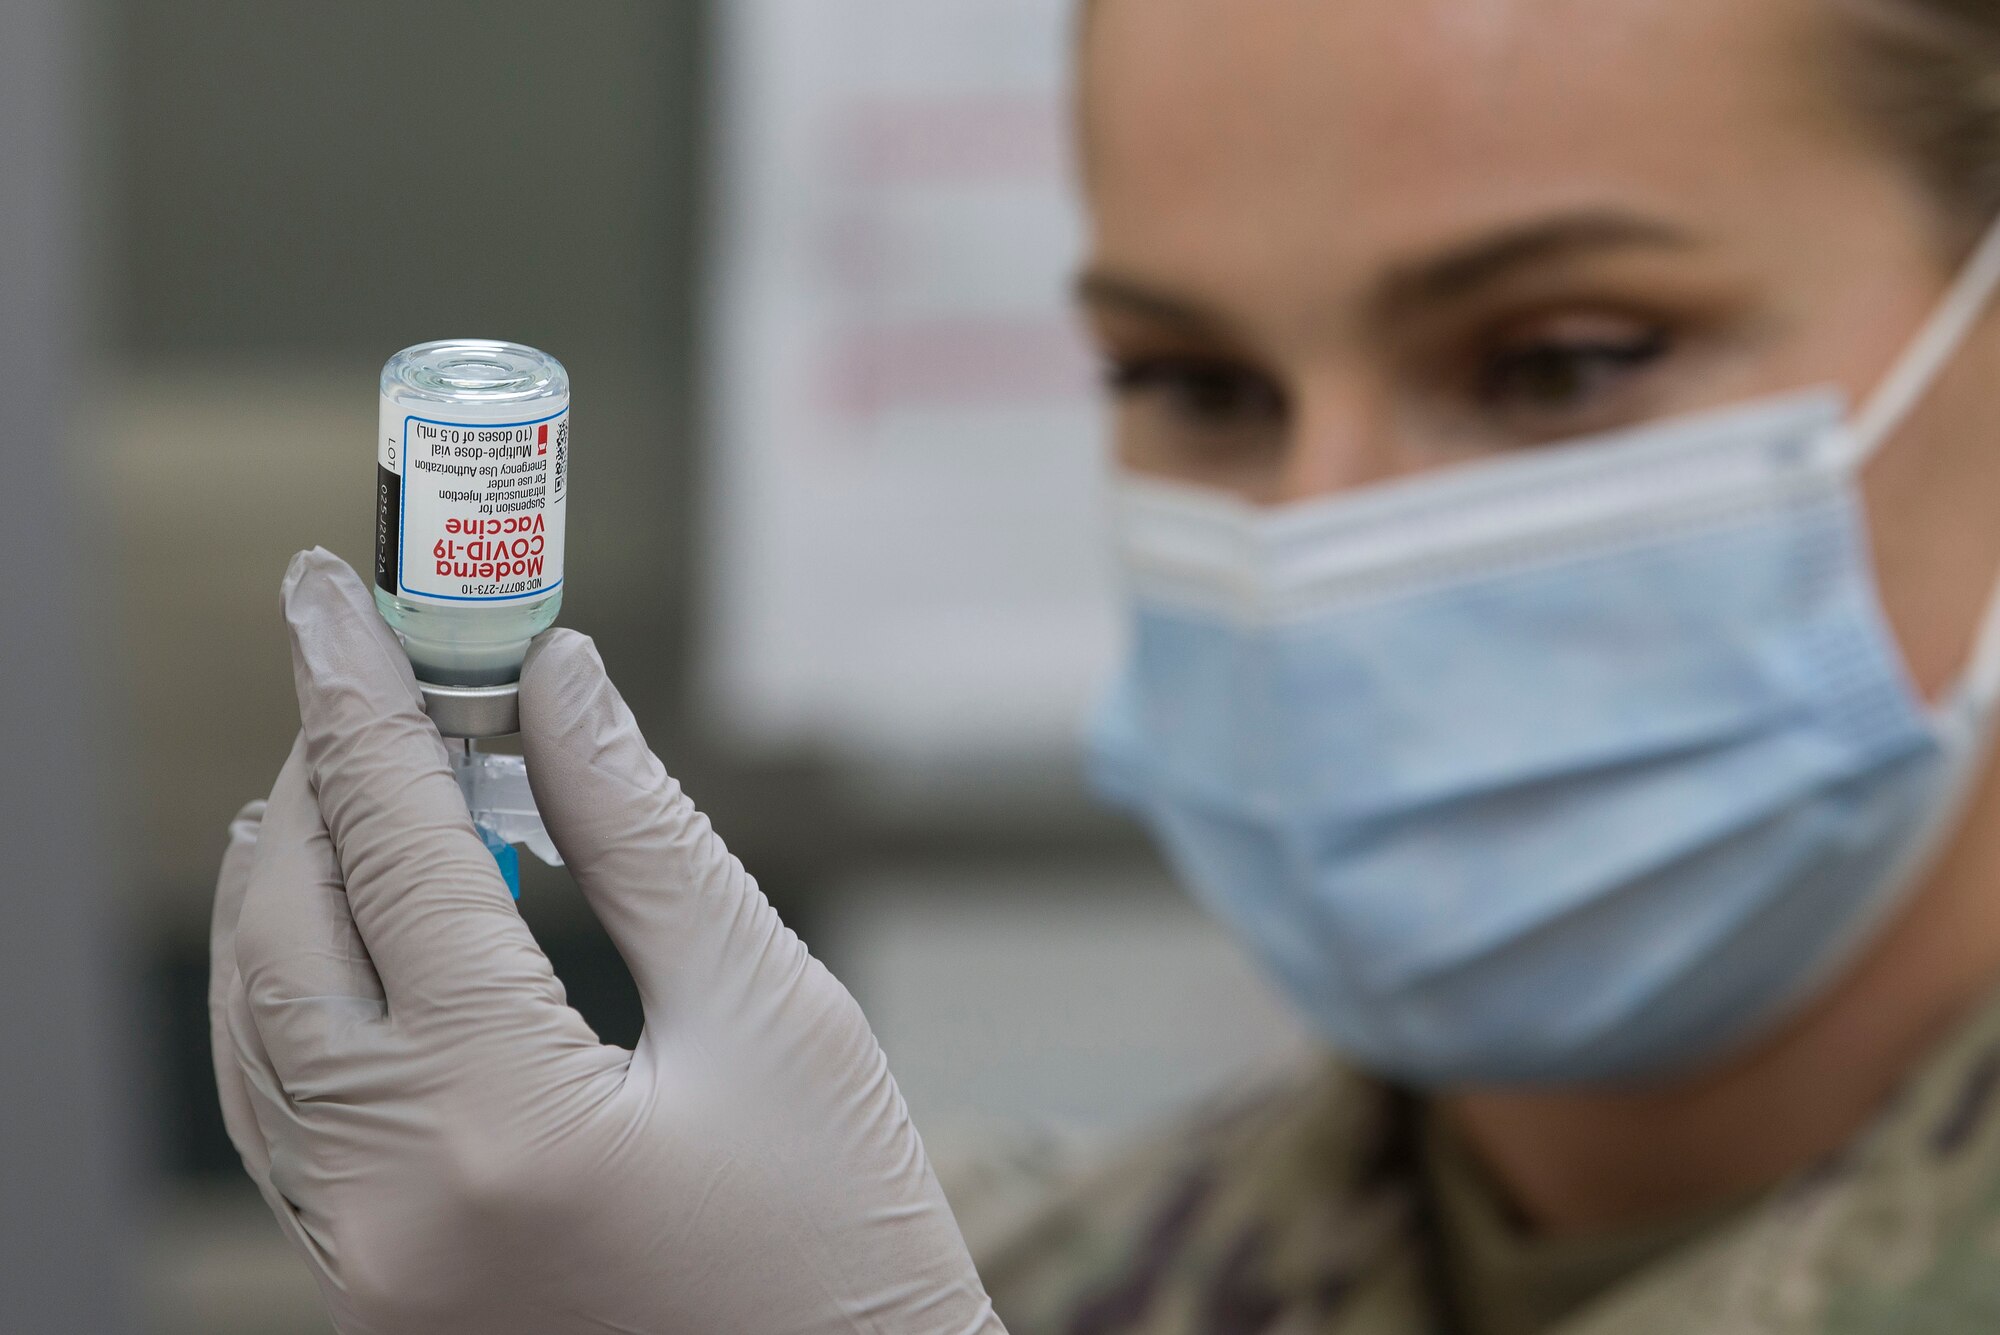 U.S. Air Force Staff Sgt. Bianca Marts, 380th Expeditionary Medical Group (EMDG) medical technician, prepares to administer a voluntary COVID-19 vaccine at Al Dhafra Air Base, United Arab Emirates, Jan. 24, 2021.